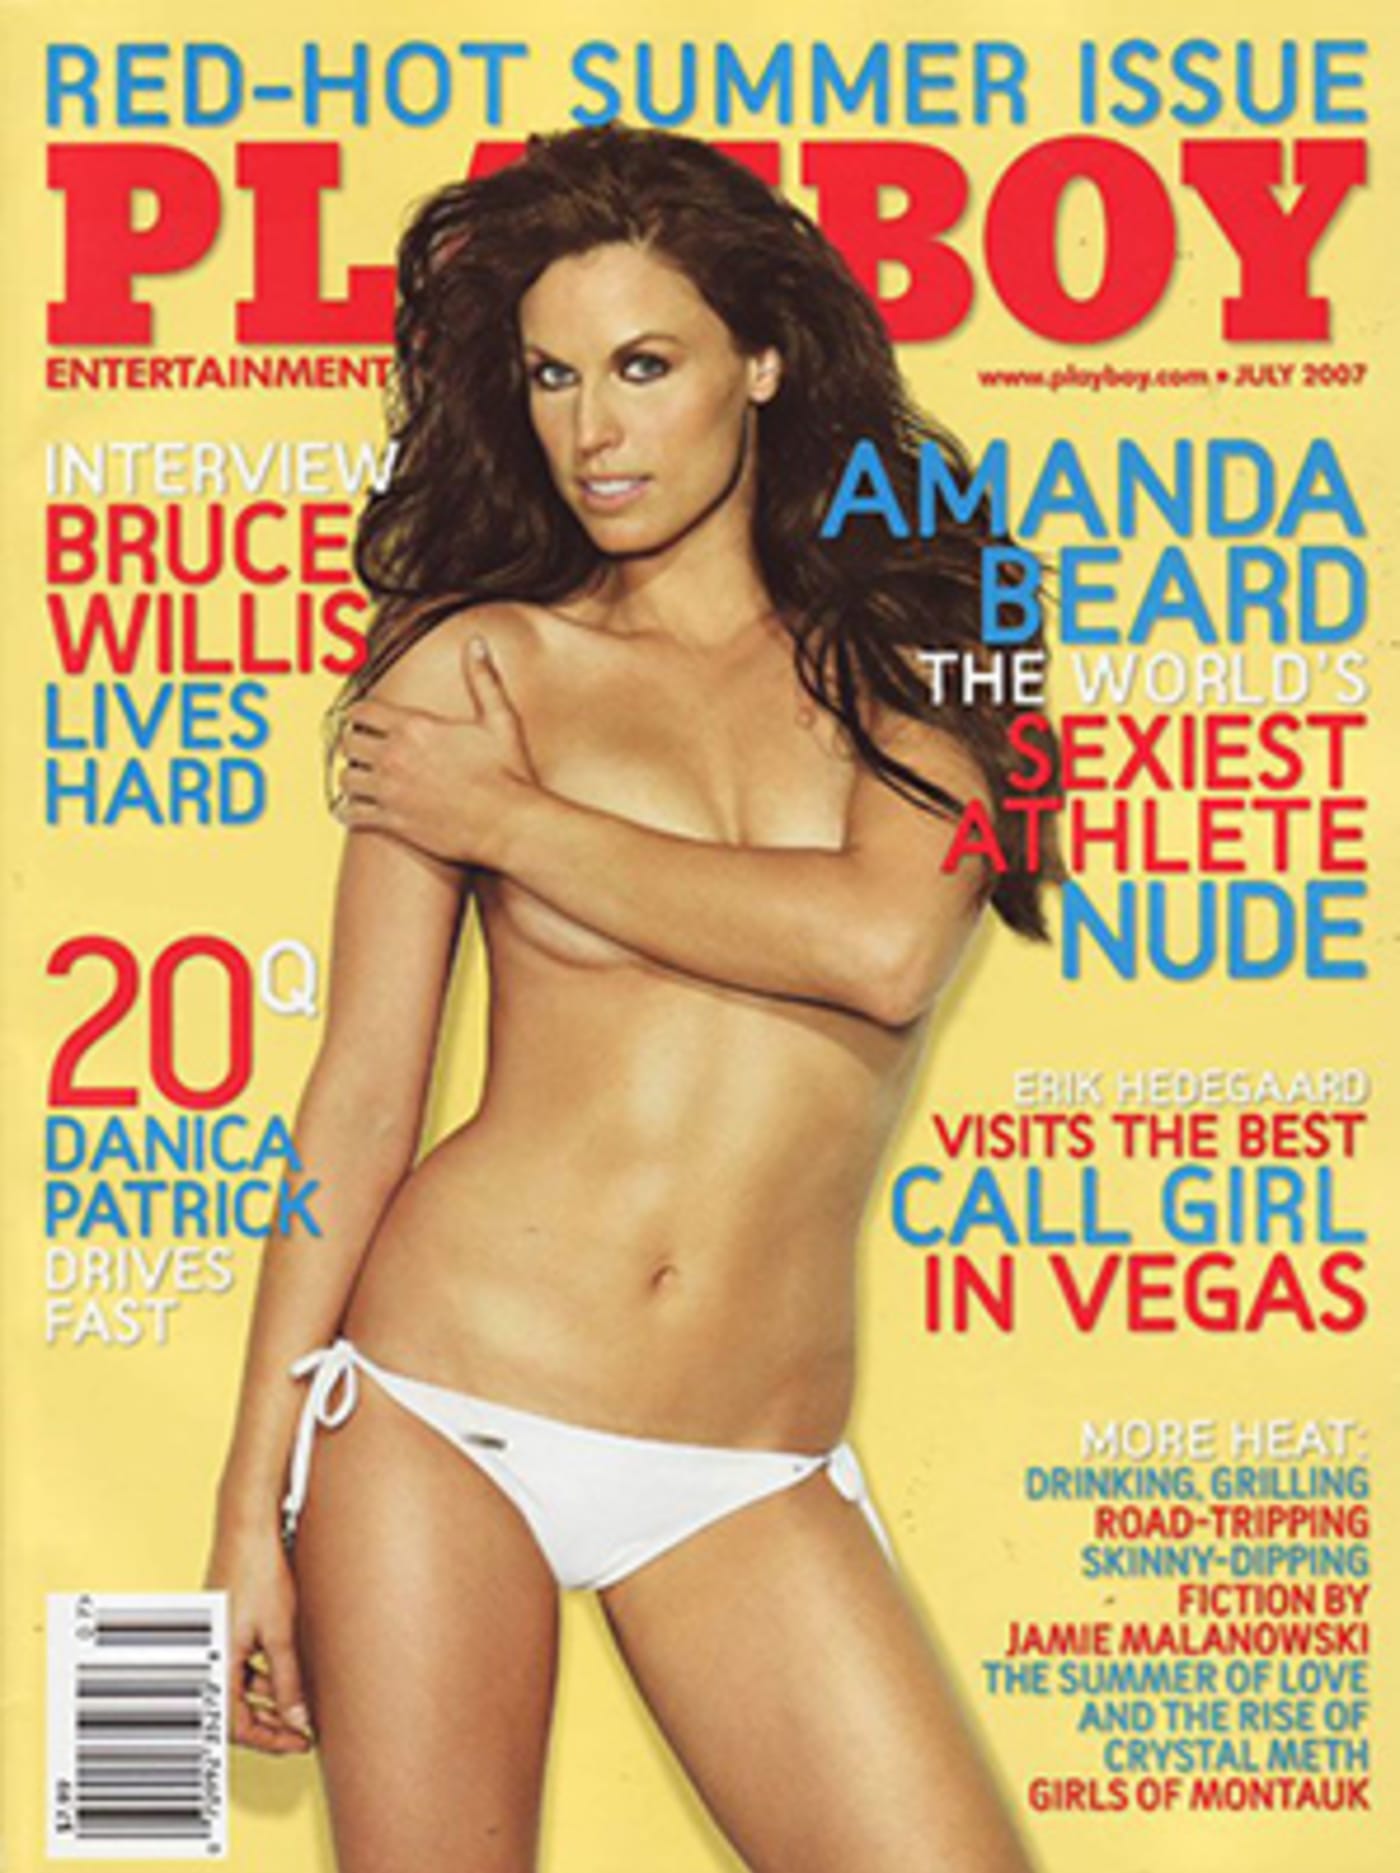 Sex Videos 50 Boys 50 Girls Sex - Playboy Nudes By The Hottest Celebrities: 50 Celebrities Who Posed Naked  For The Magazine | Complex